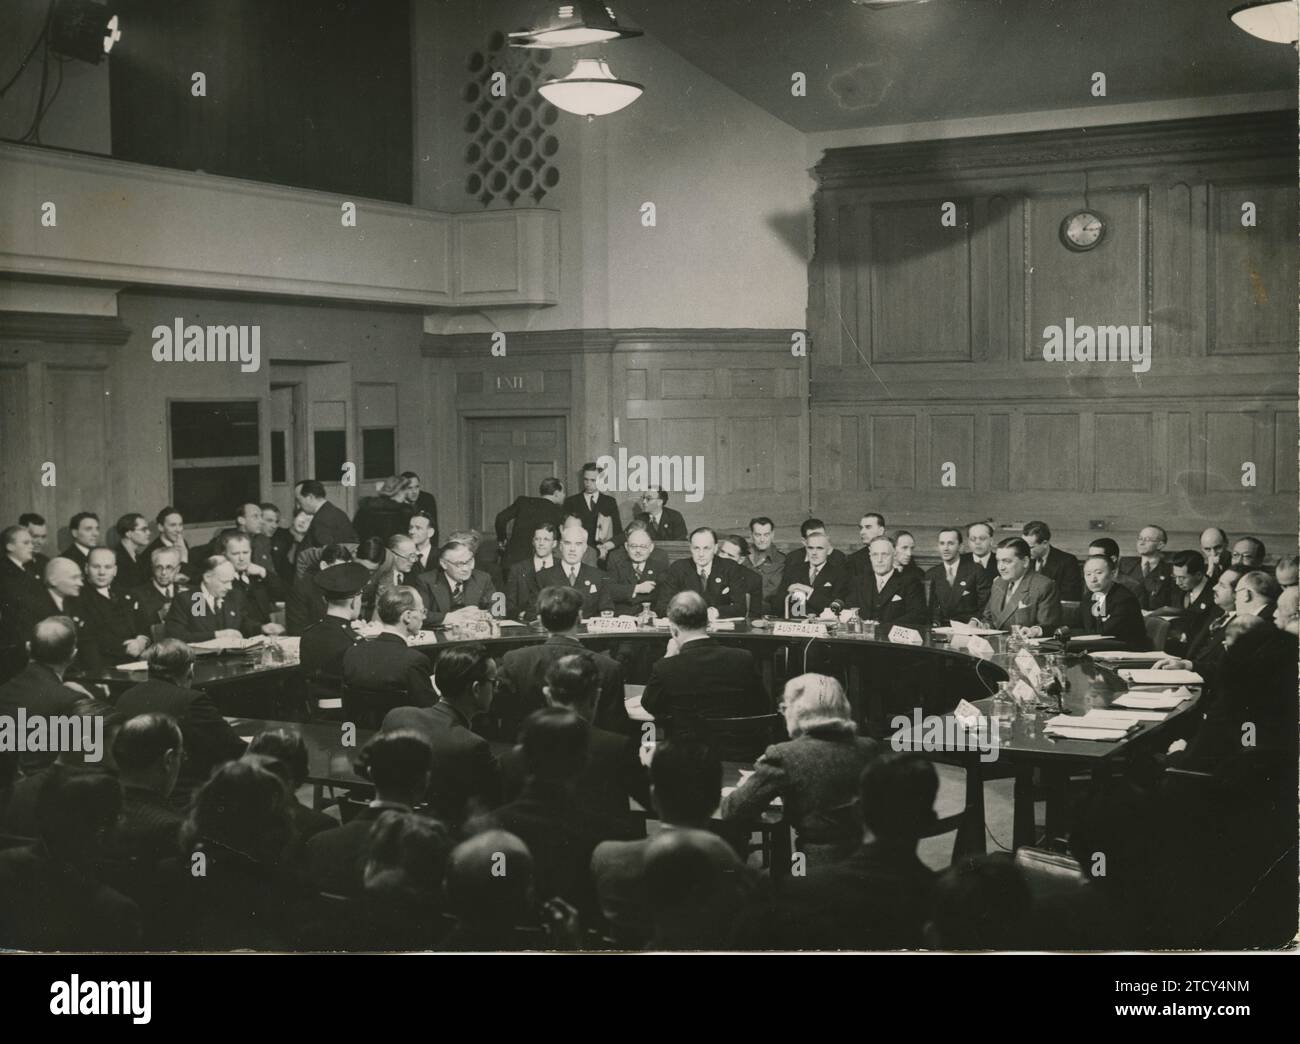 London, 01/17/1946. The first Assembly of the United Nations Organization. Here is one of the laborious sessions of the Security Council, in the Central Hall, the former Methodist church in Westminster. The UN has just appointed, by unanimous vote of the Security Council, the Norwegian Minister of Foreign Affairs, Trygve Lie, as Secretary General. Credit: Album / Archivo ABC Stock Photo